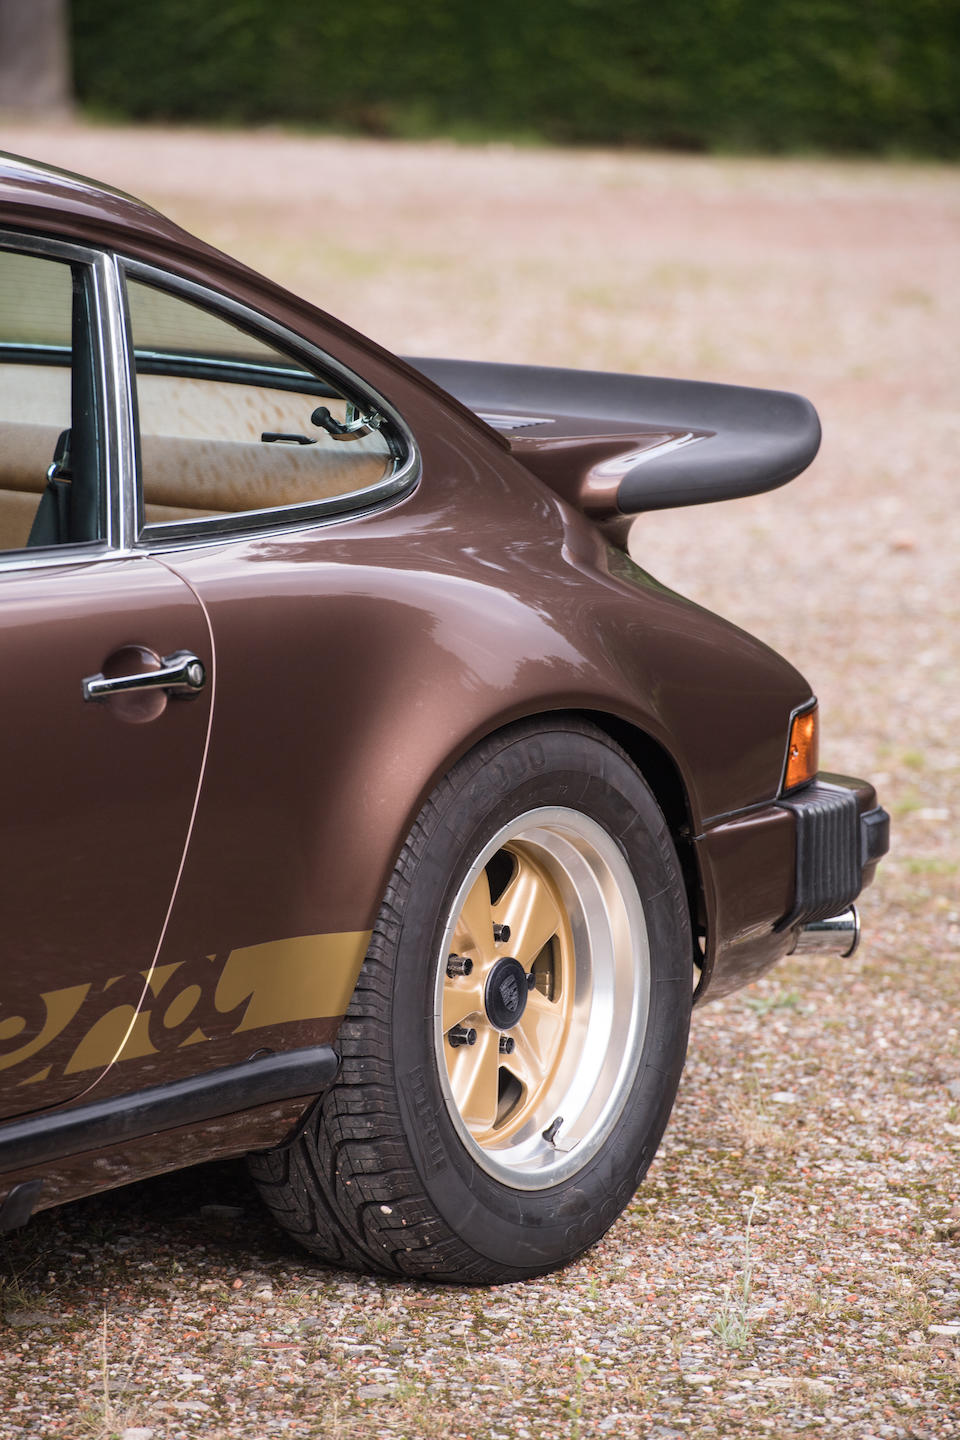 1 of only 2 built to these specifications,1976  Porsche  911 Carrera 2.7-Litre MFI 'Sondermodell' Coup&#233;  Chassis no. 911 660 9034 Engine no. 666 8056